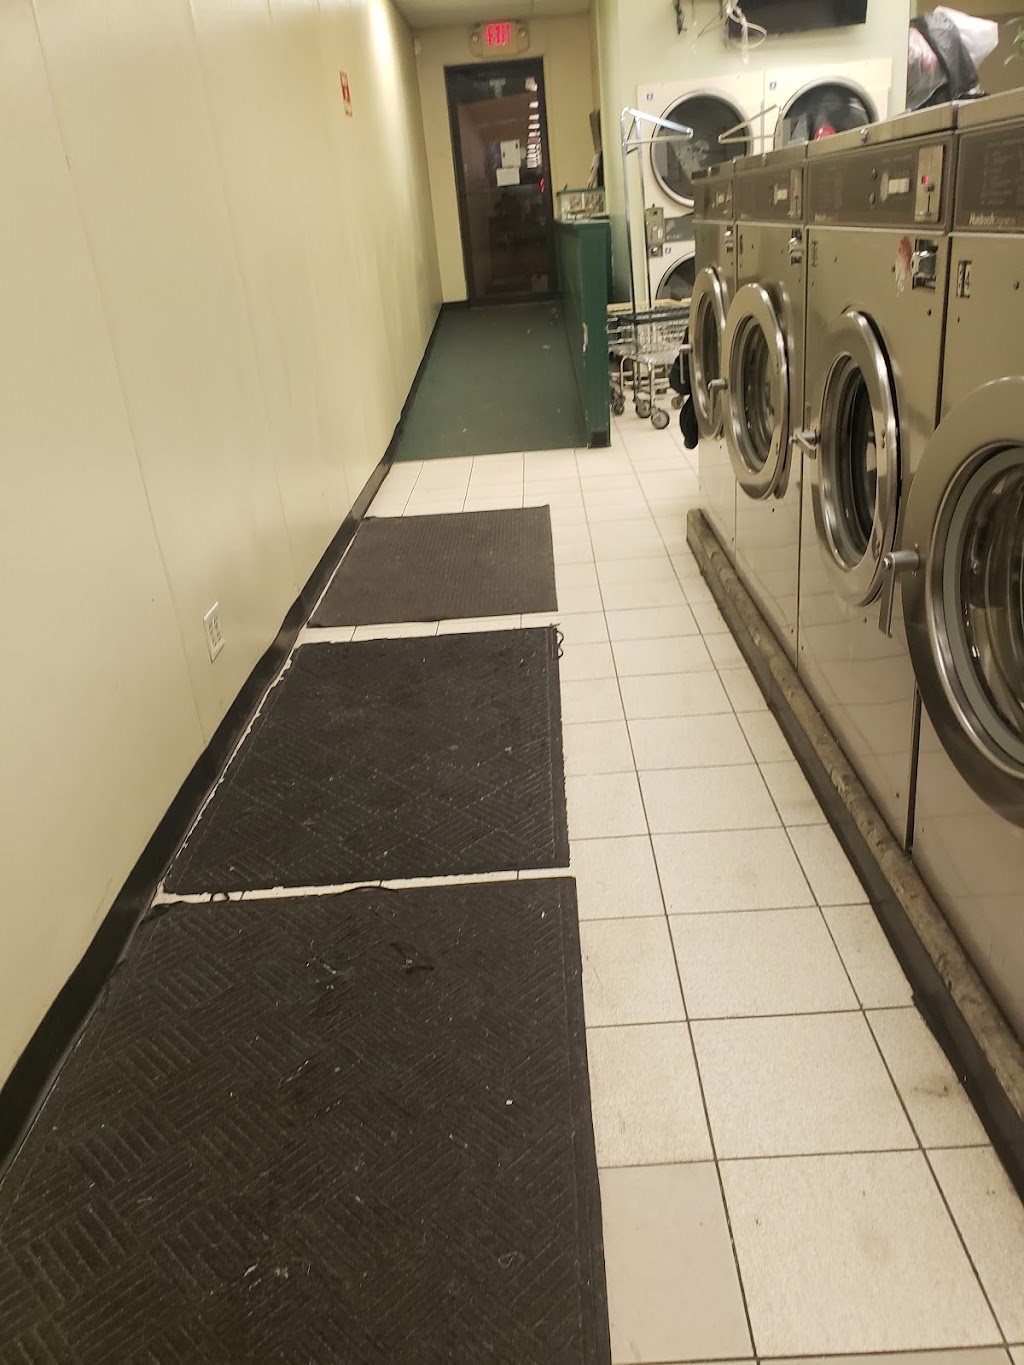 Crowne Cleaner & Laundromat | 389 Piaget Ave, Clifton, NJ 07011 | Phone: (973) 253-2318